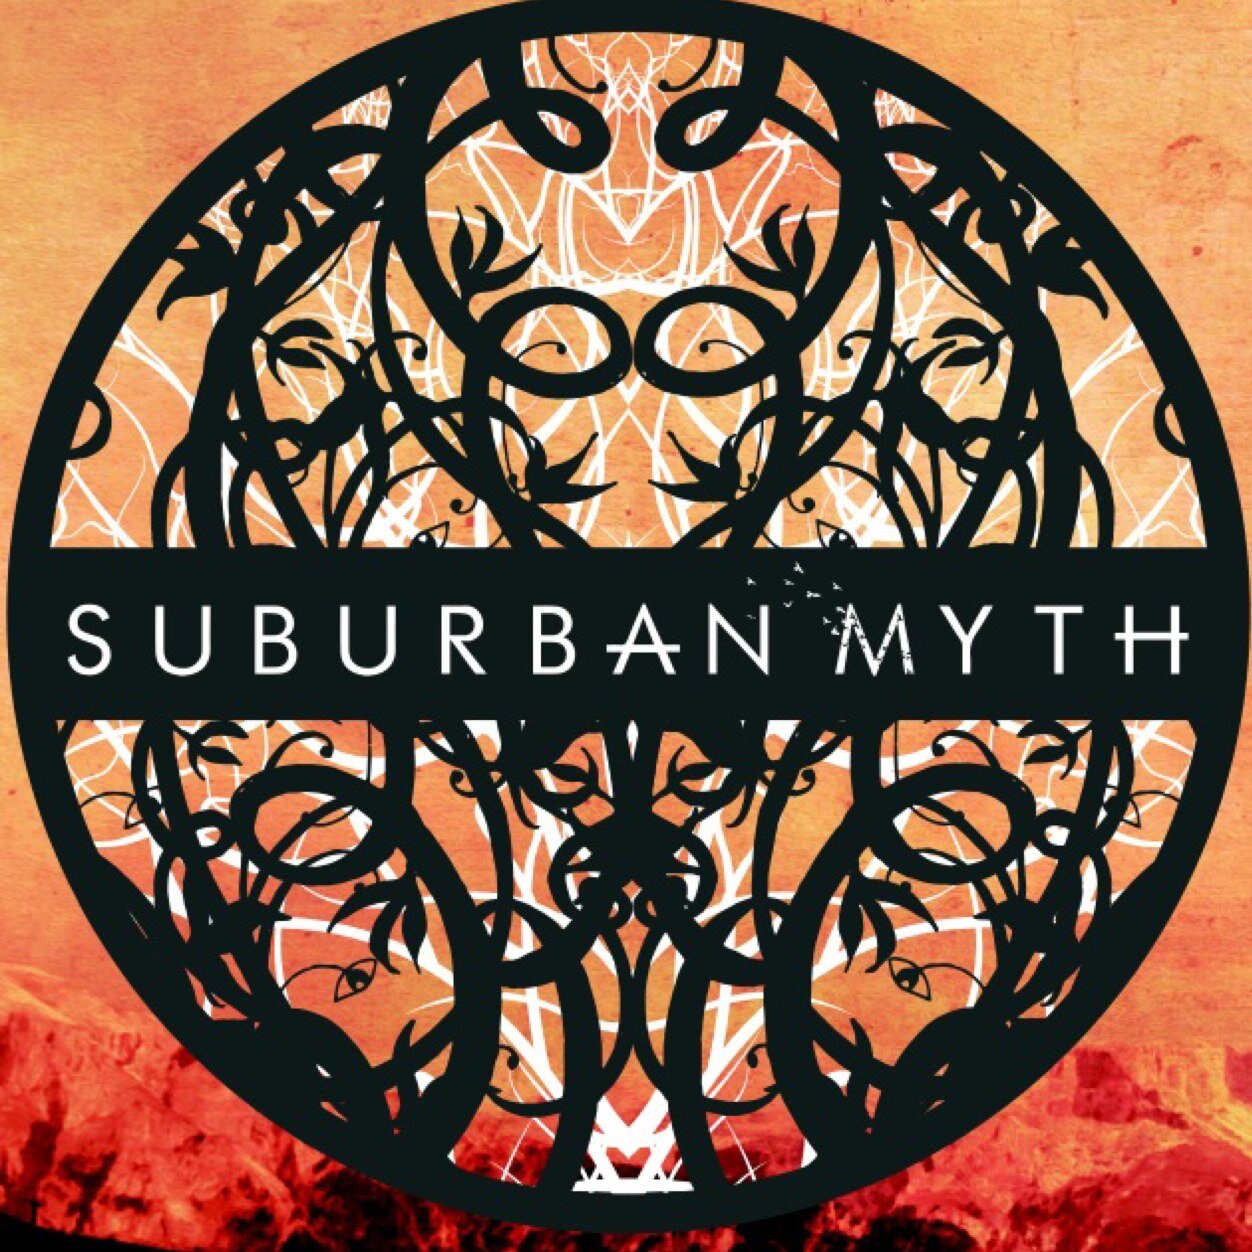 Suburban Myth is an alternative rock band out of Charleston, SC. #unplugged #thejourney